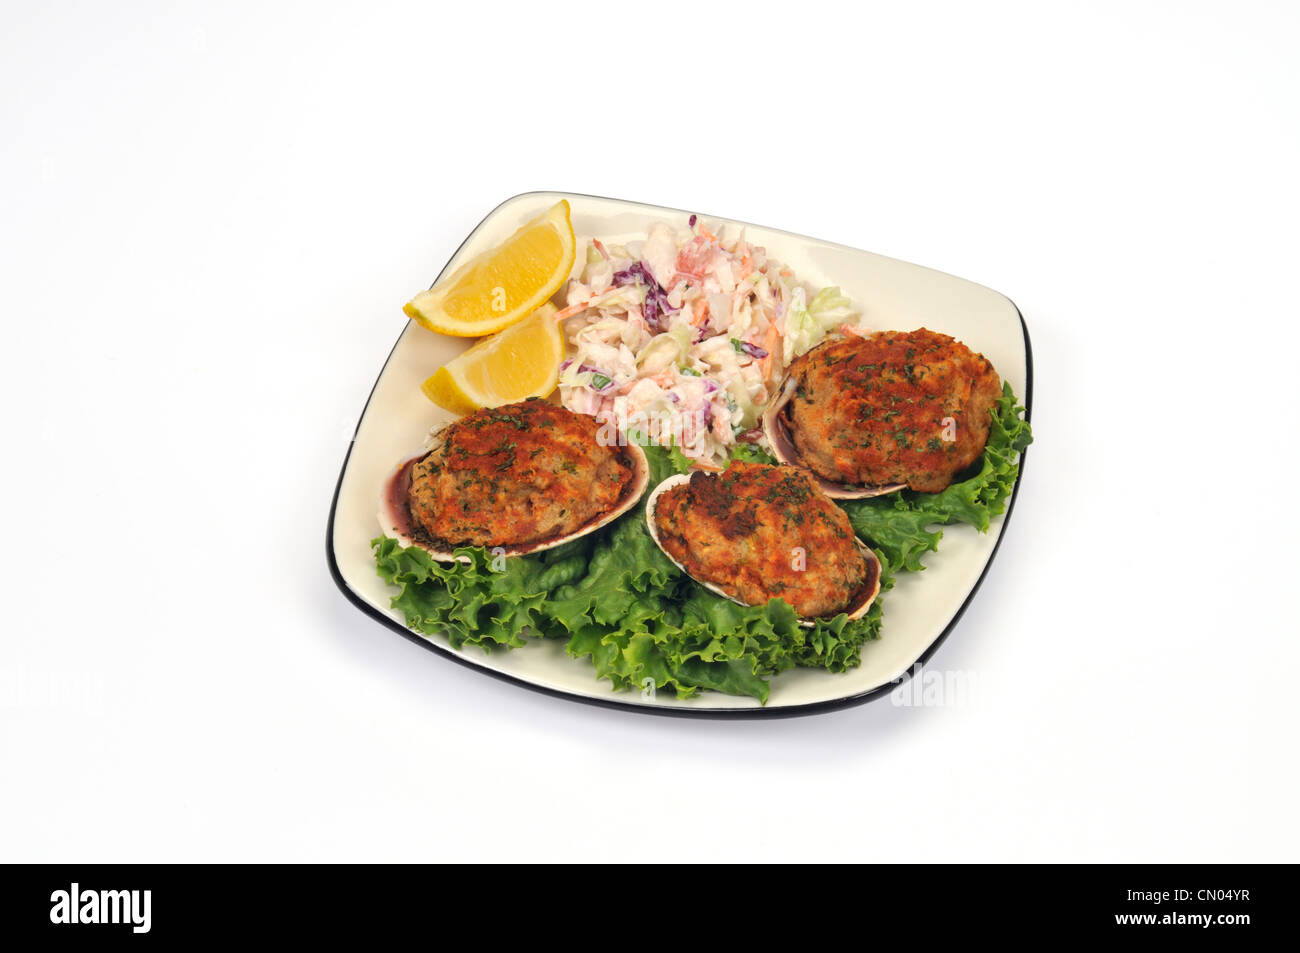 Plate of stuffed clams on lettuce with cole slaw and lemon wedges Stock Photo